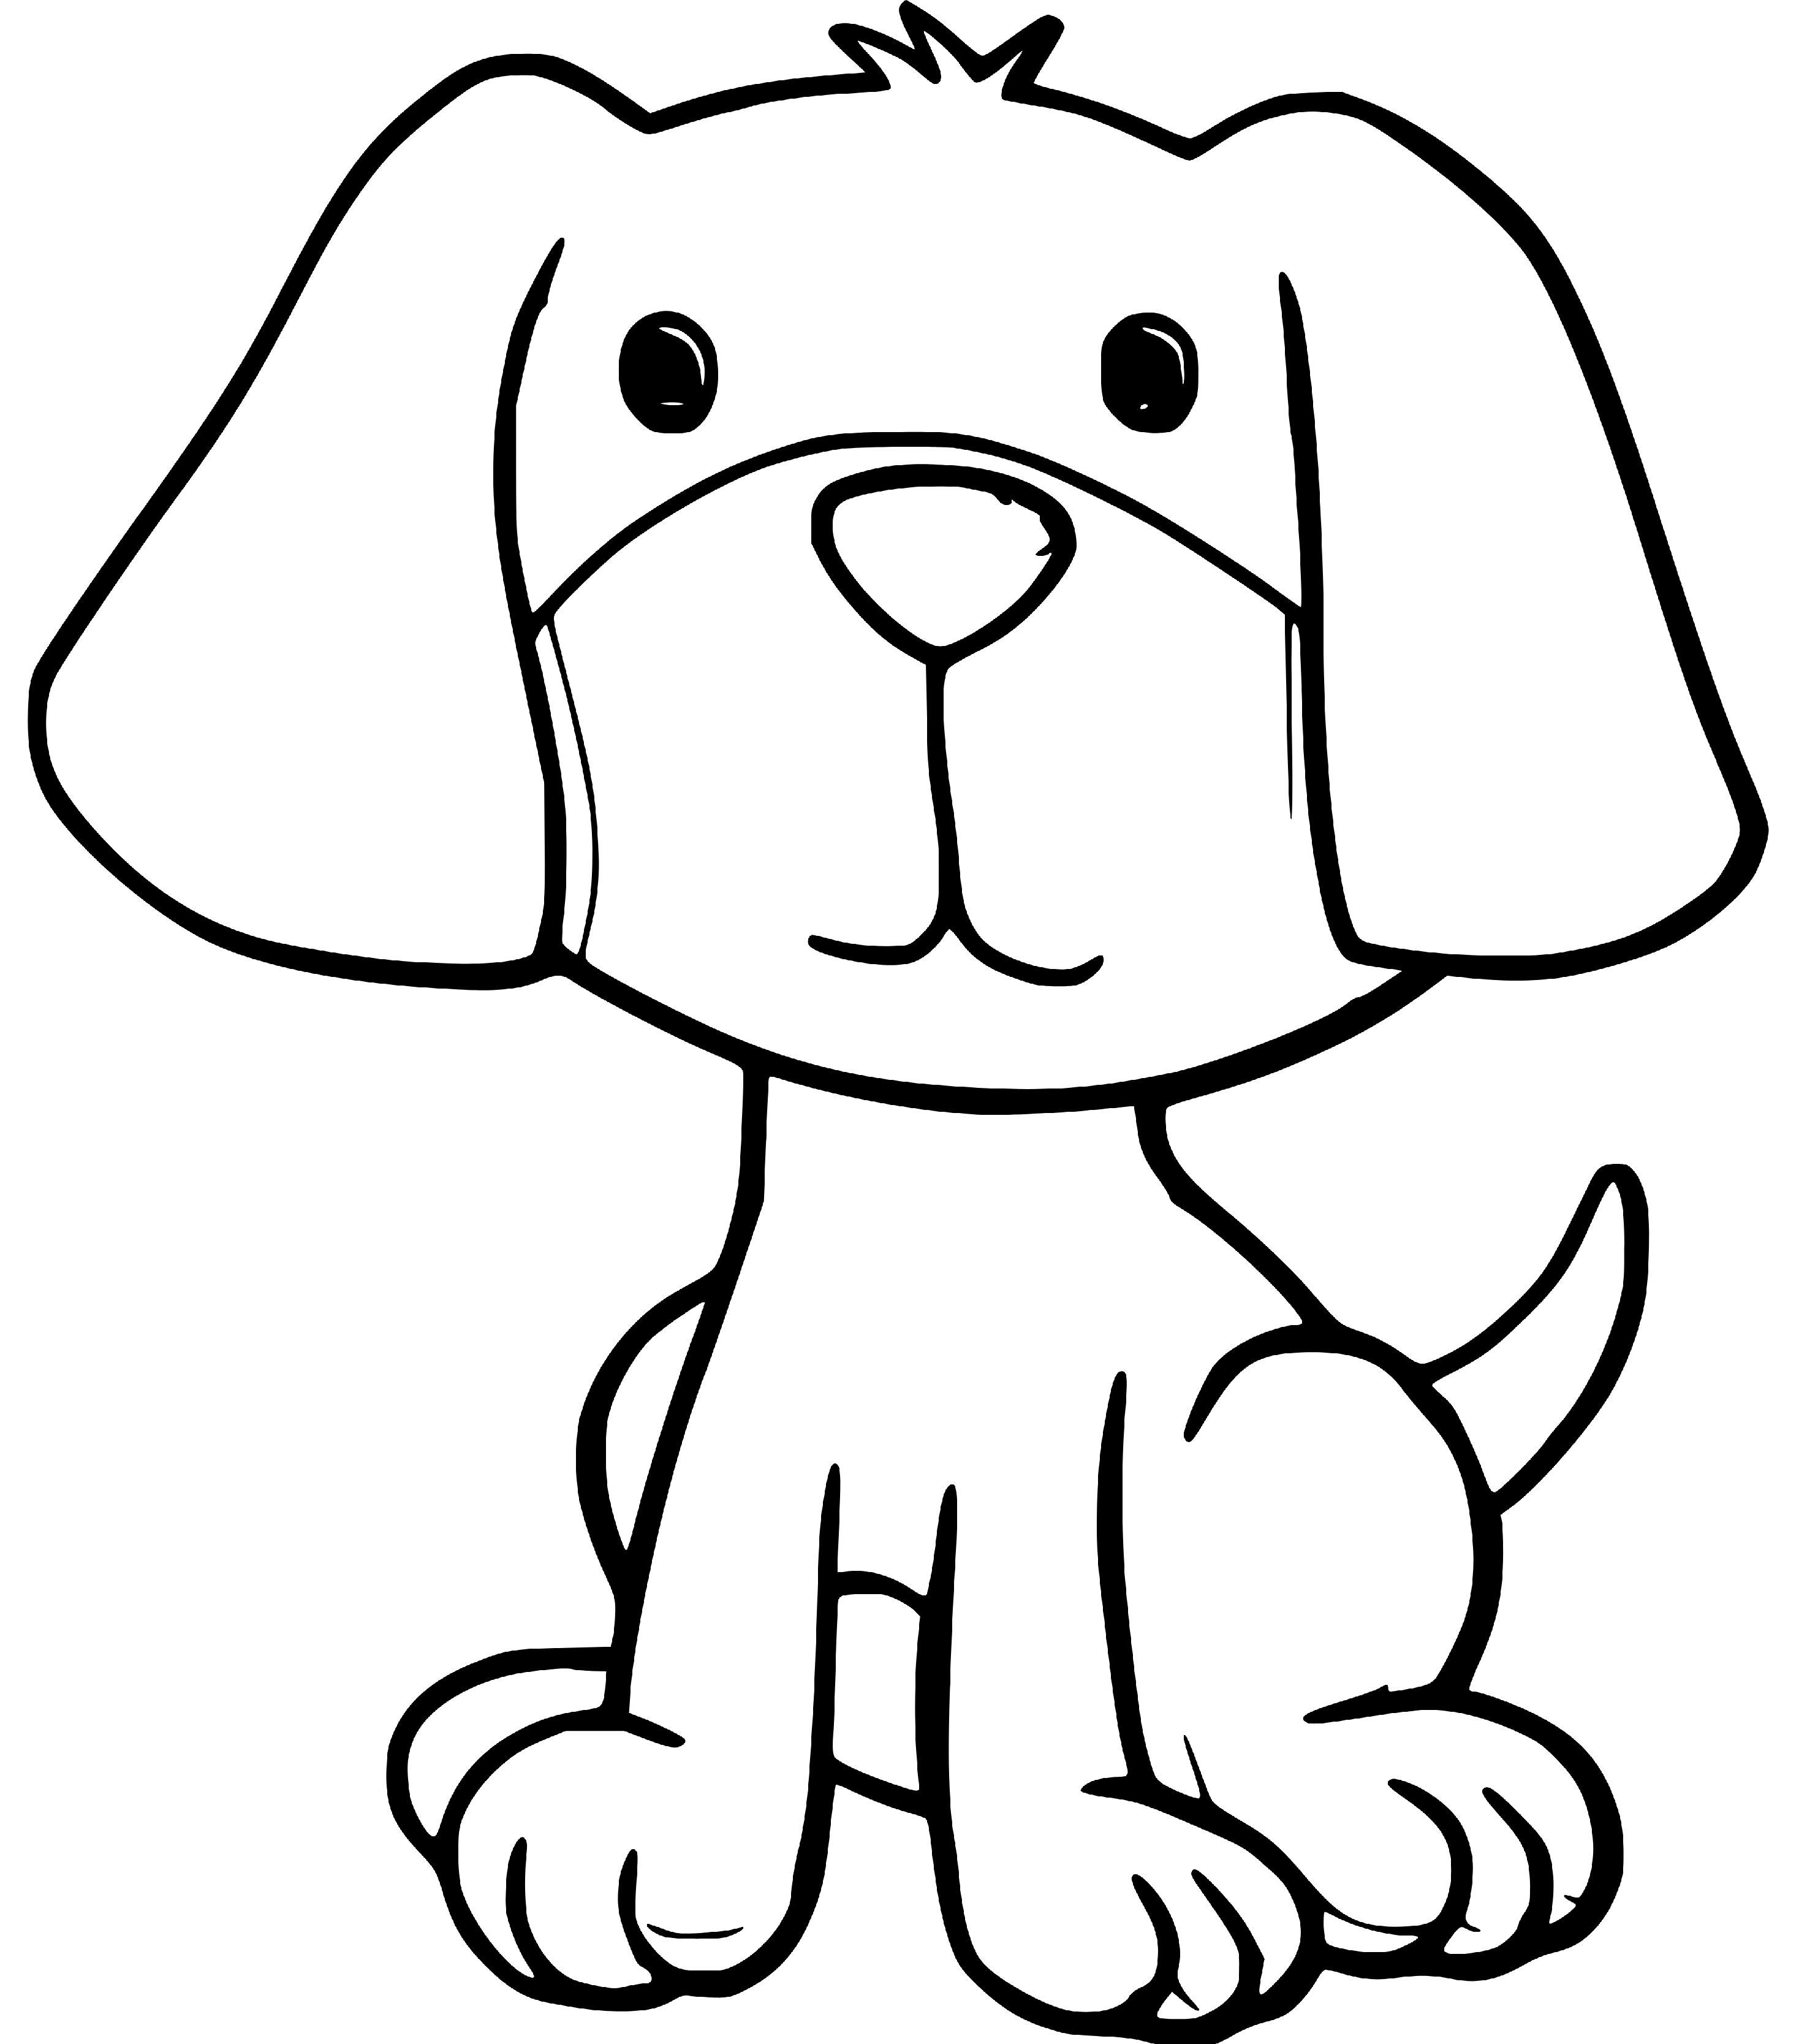 Printable Cute Puppy Coloring Page for kids.